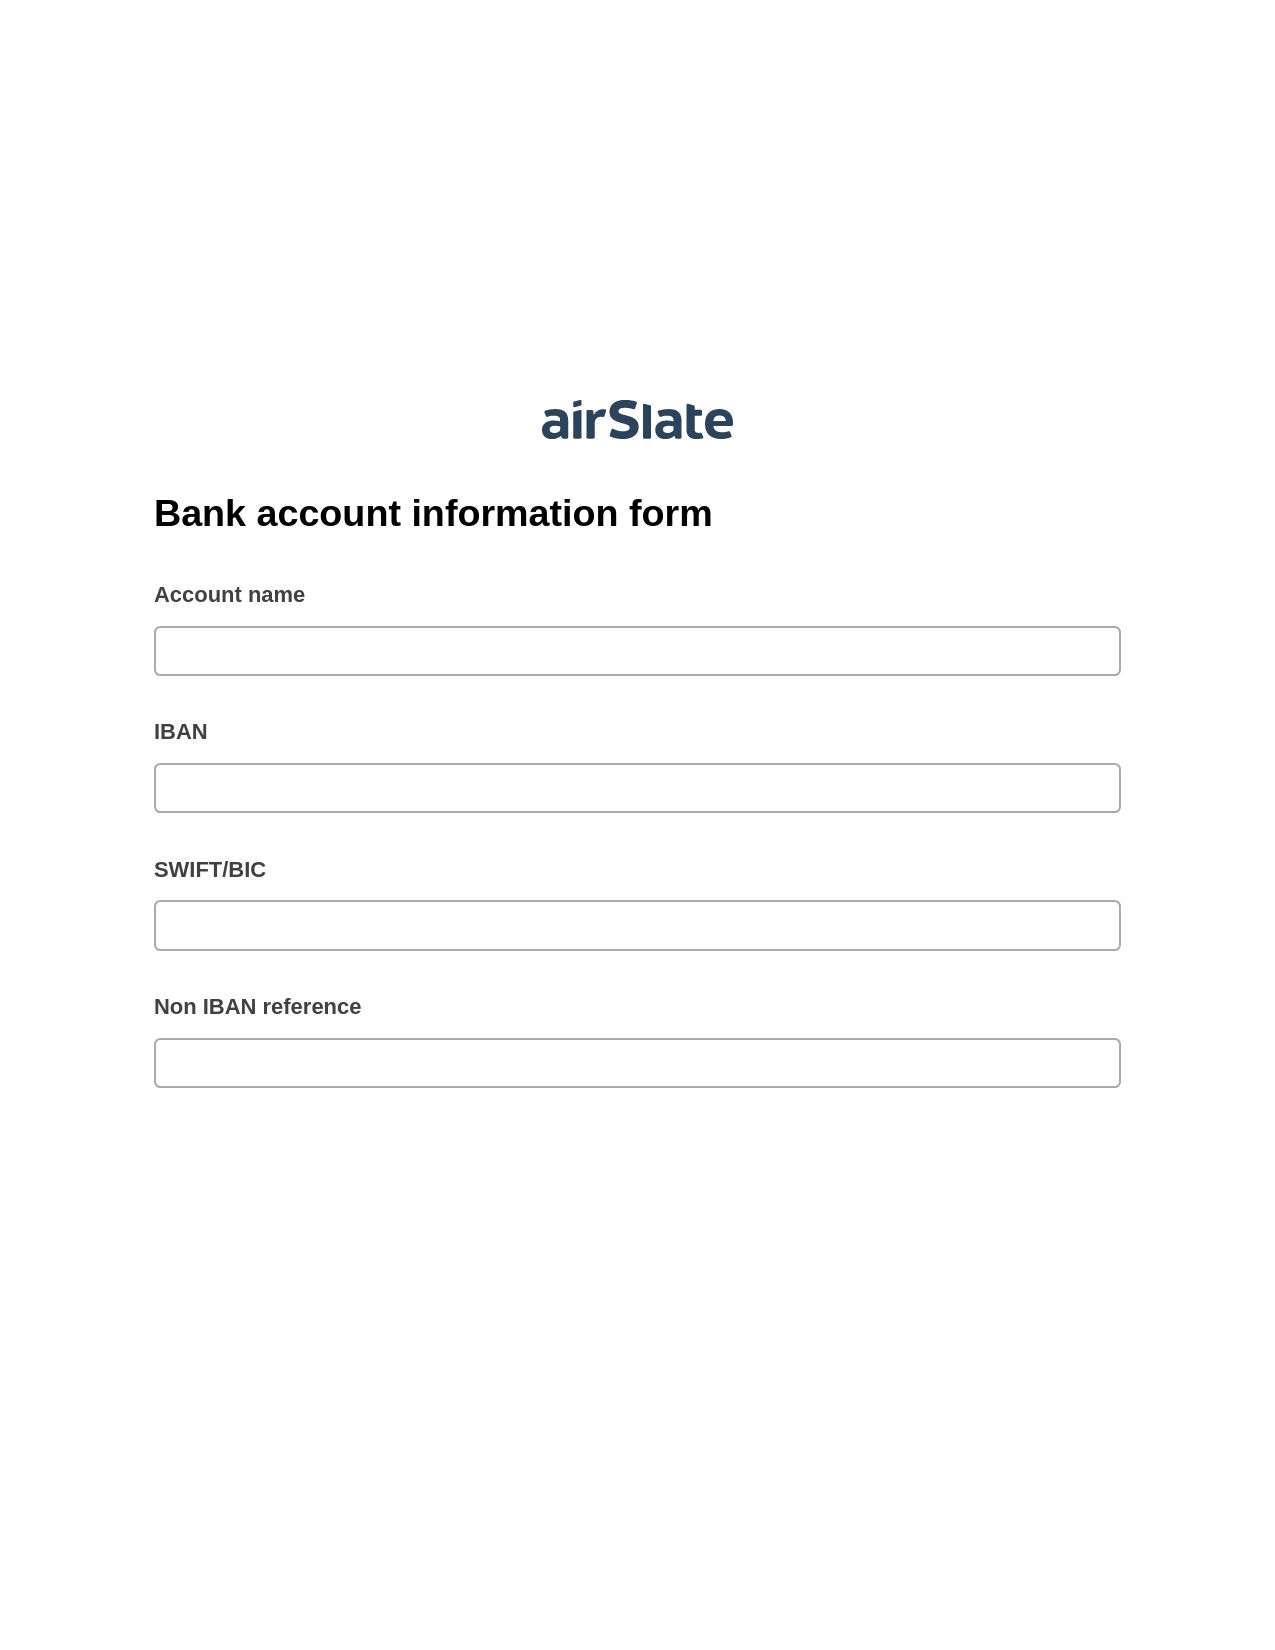 Bank account information form Pre-fill from CSV File Dropdown Options Bot, Remove Tags From Slate Bot, Archive to SharePoint Folder Bot